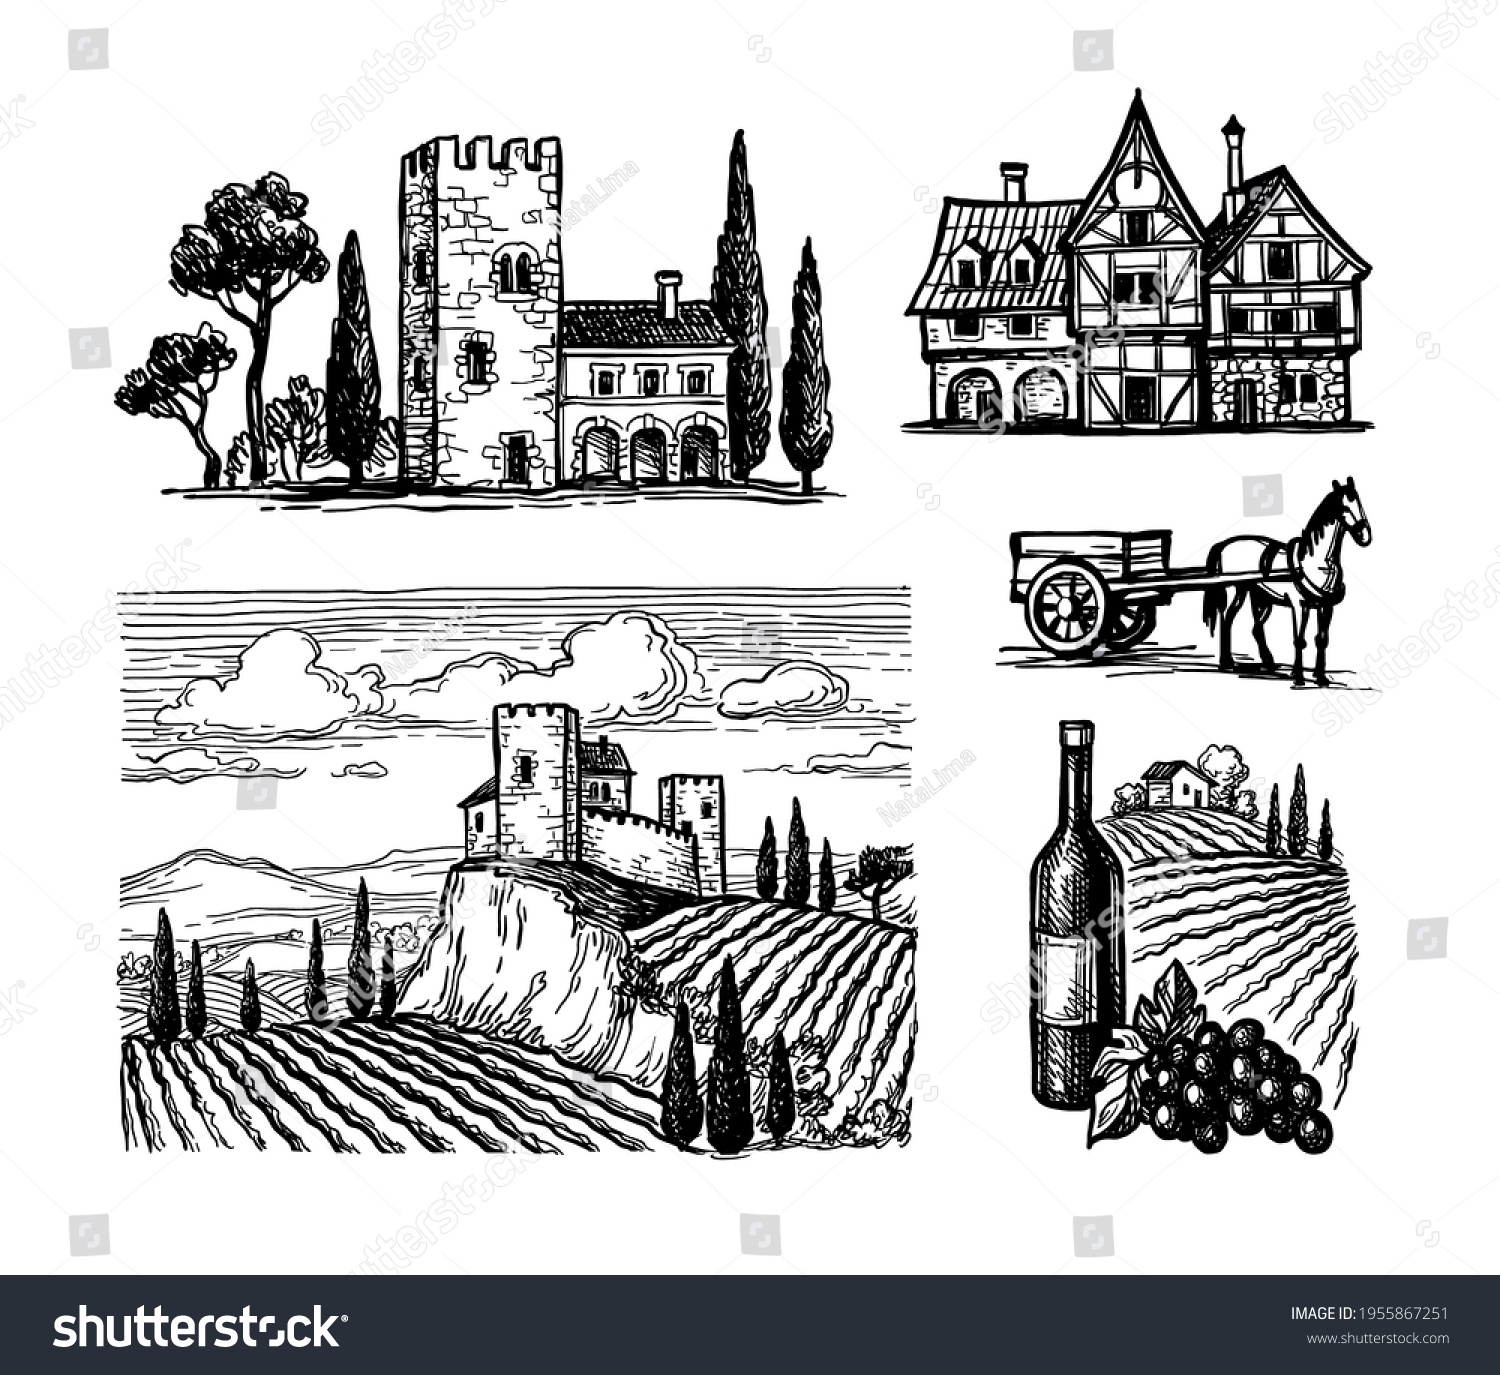 SVG of Set of ink sketches isolated on white background. Vineyard landscape. Old country houses. Horse harnessed to a cart. Wine bottles and bunch of grapes. Hand drawn vector illustration. Retro style. svg